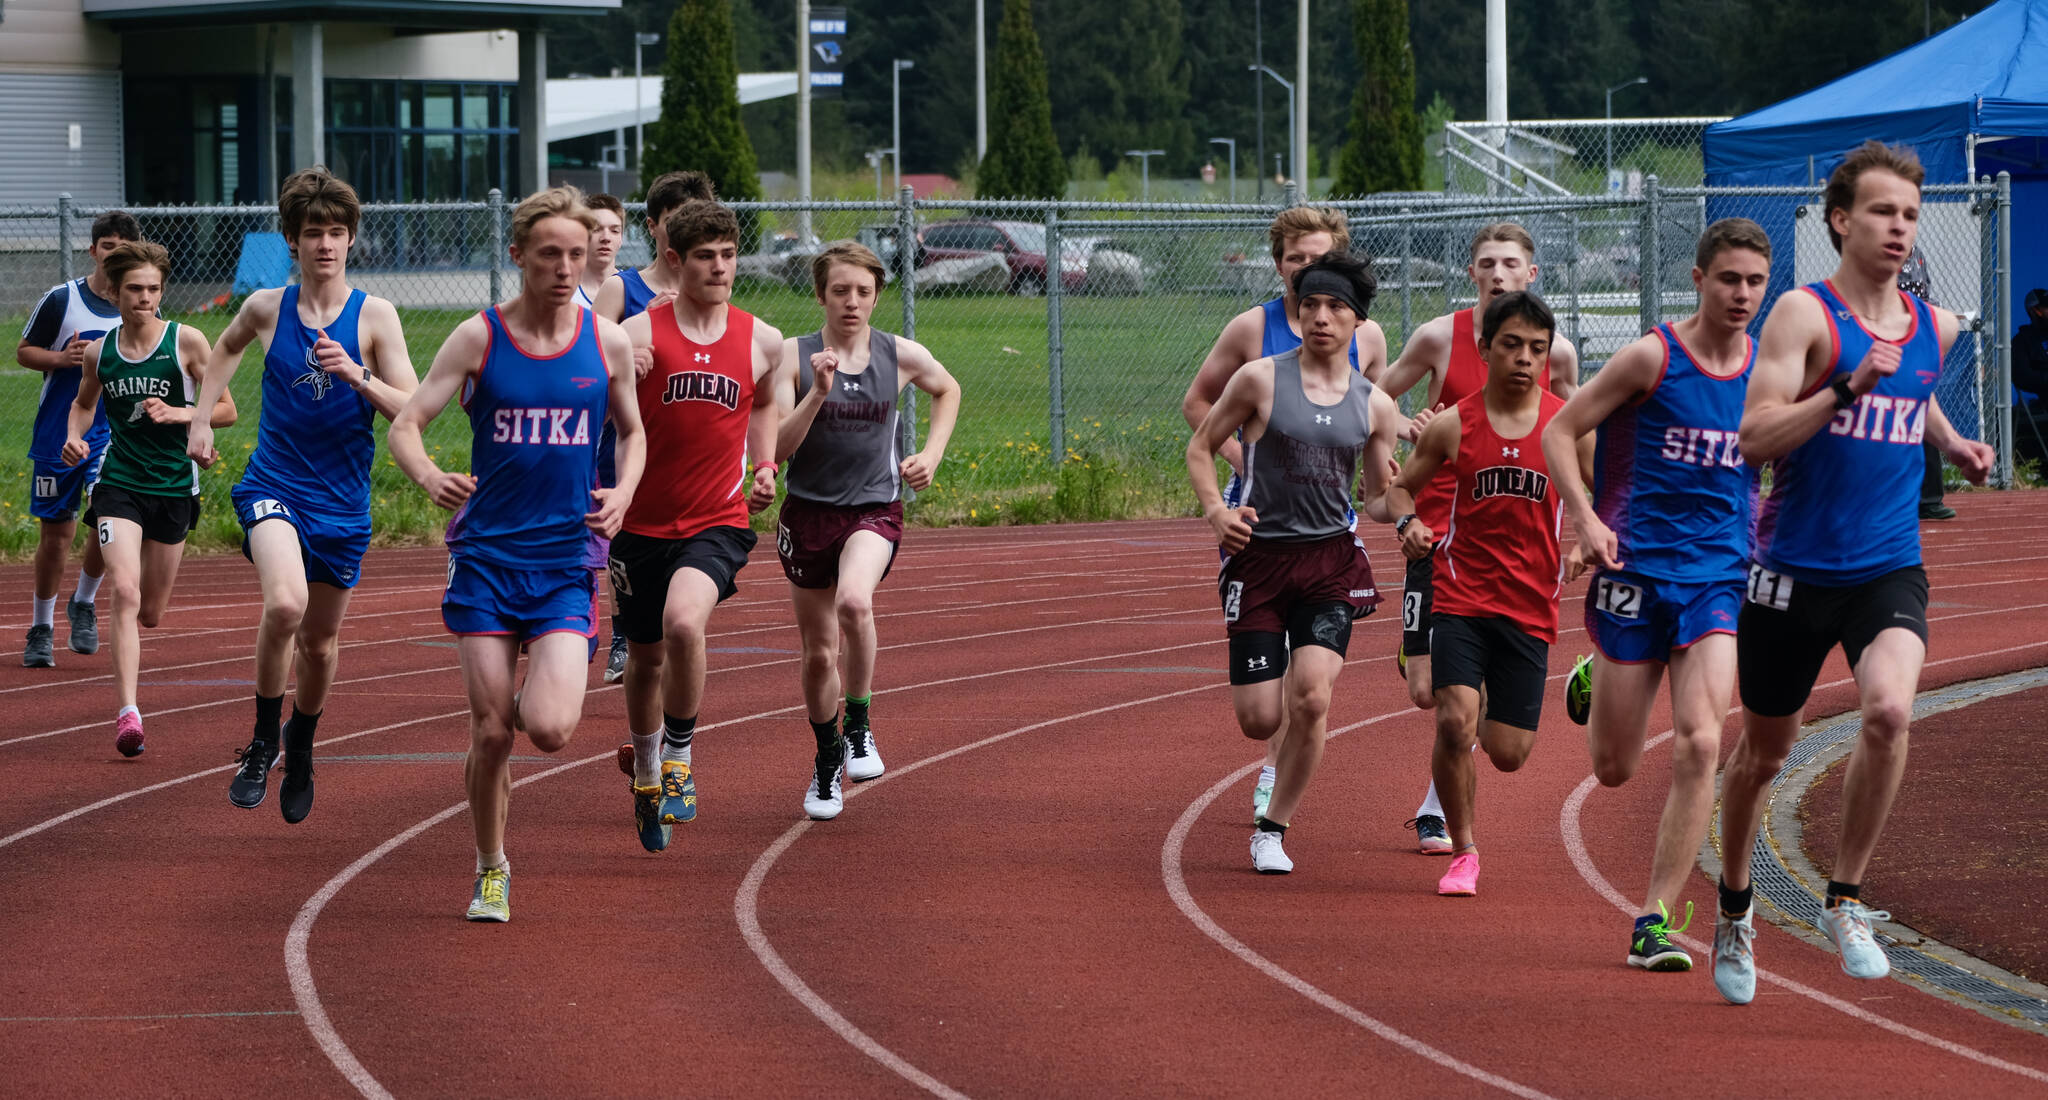 Runners round the first turn in the boys combined DI/DII 3200 meters during the Region V Track & Field Championships, Friday, at Thunder Mountain. The championships resume Saturday. (Klas Stolpe / Juneau Empire)